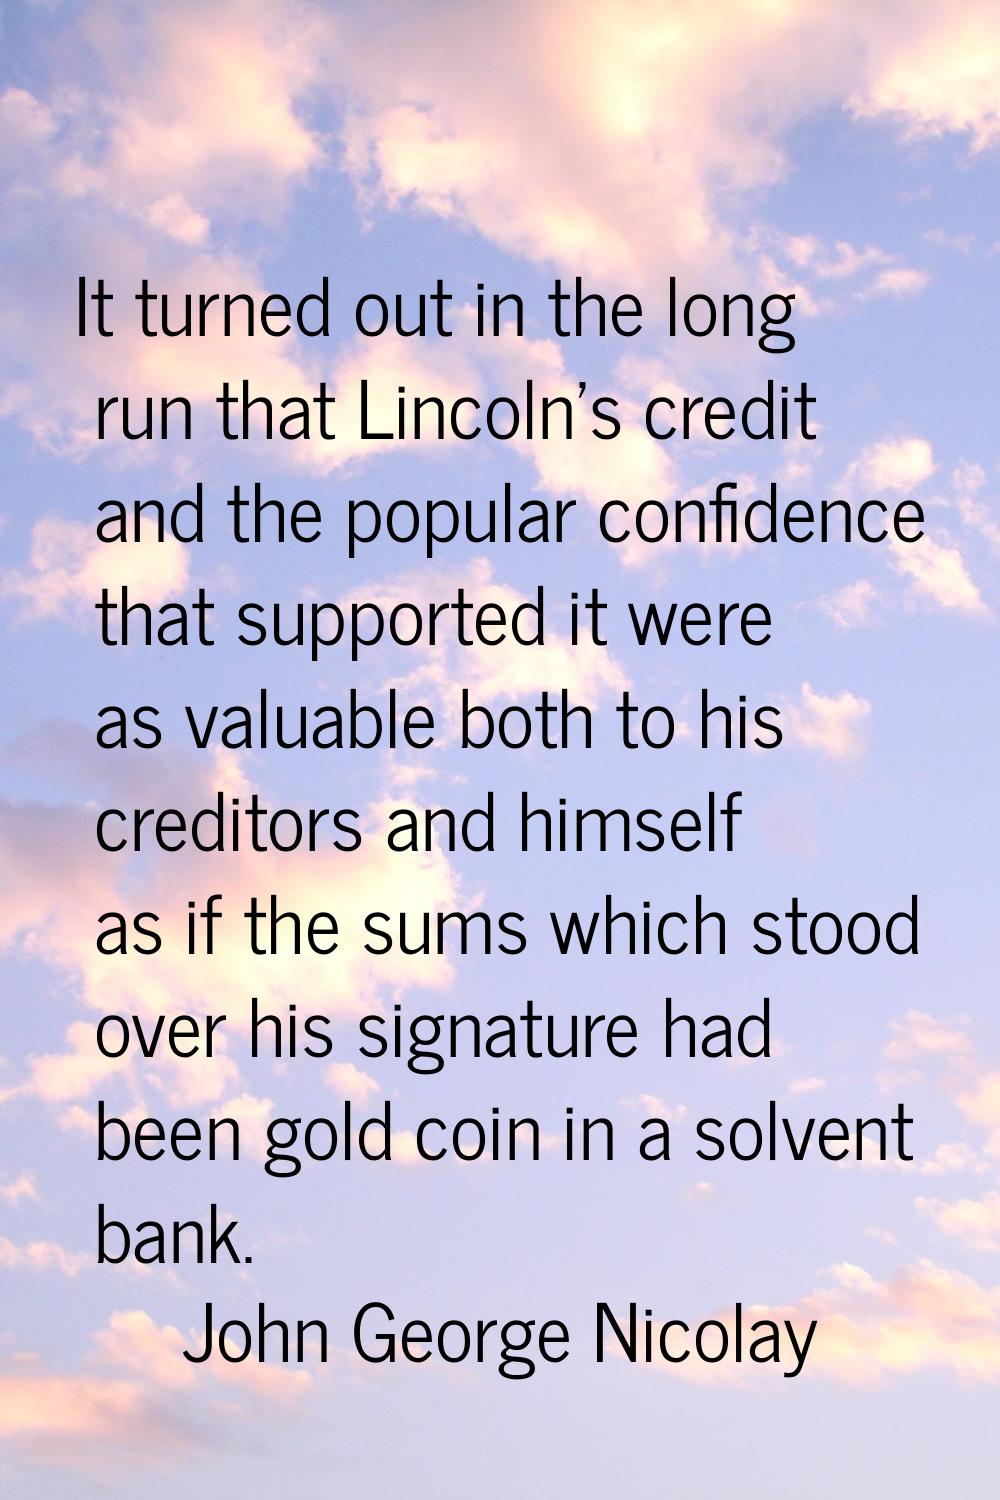 It turned out in the long run that Lincoln's credit and the popular confidence that supported it we